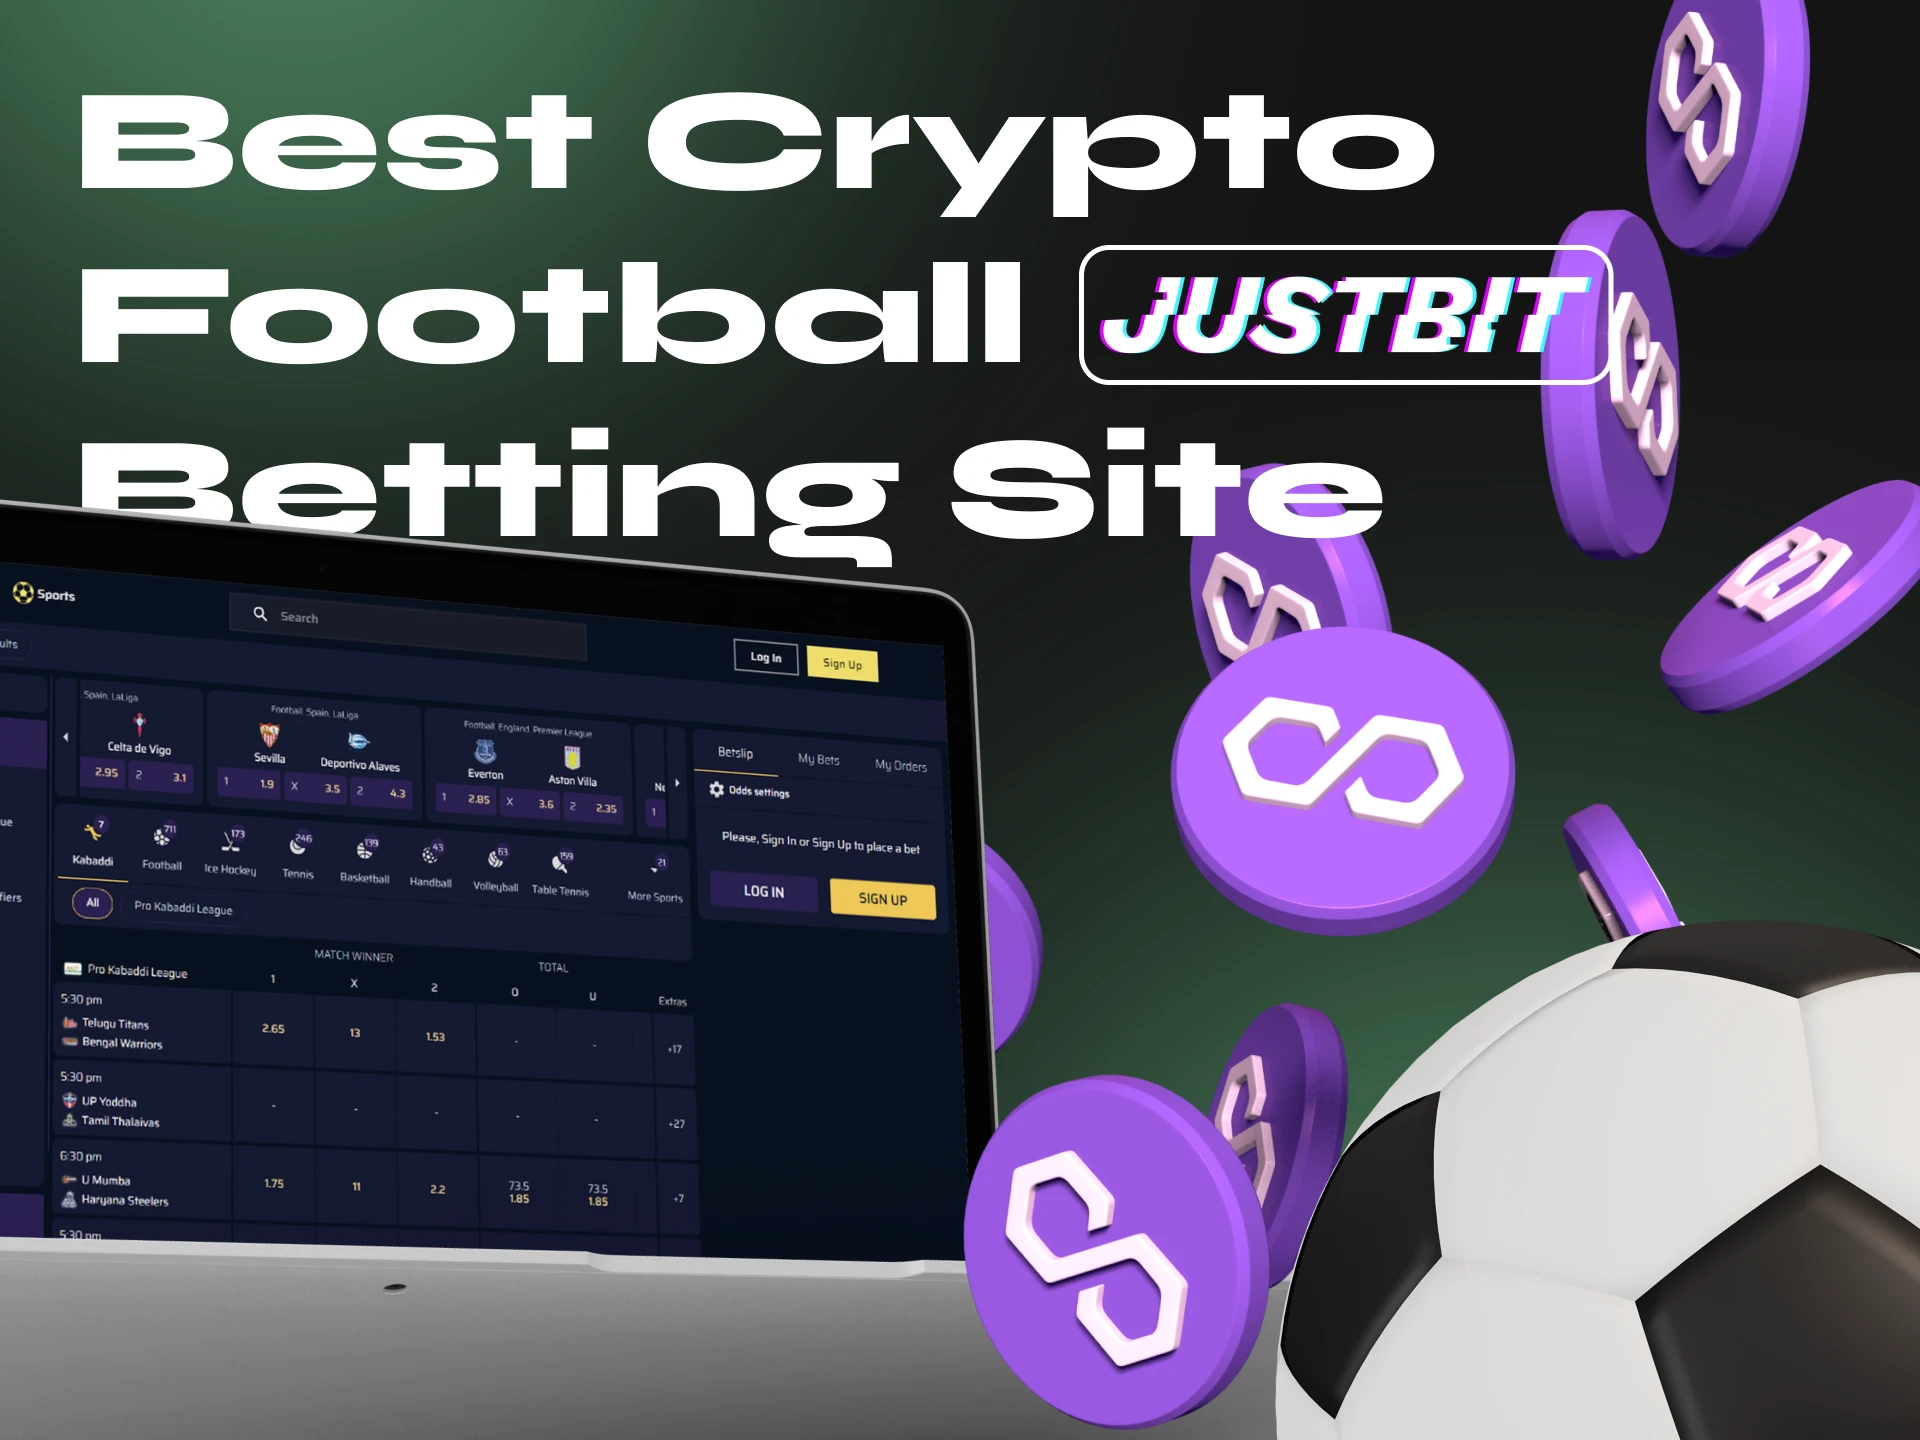 If you are looking for a crypto casino for football betting, Justbit Casino is the best choice.